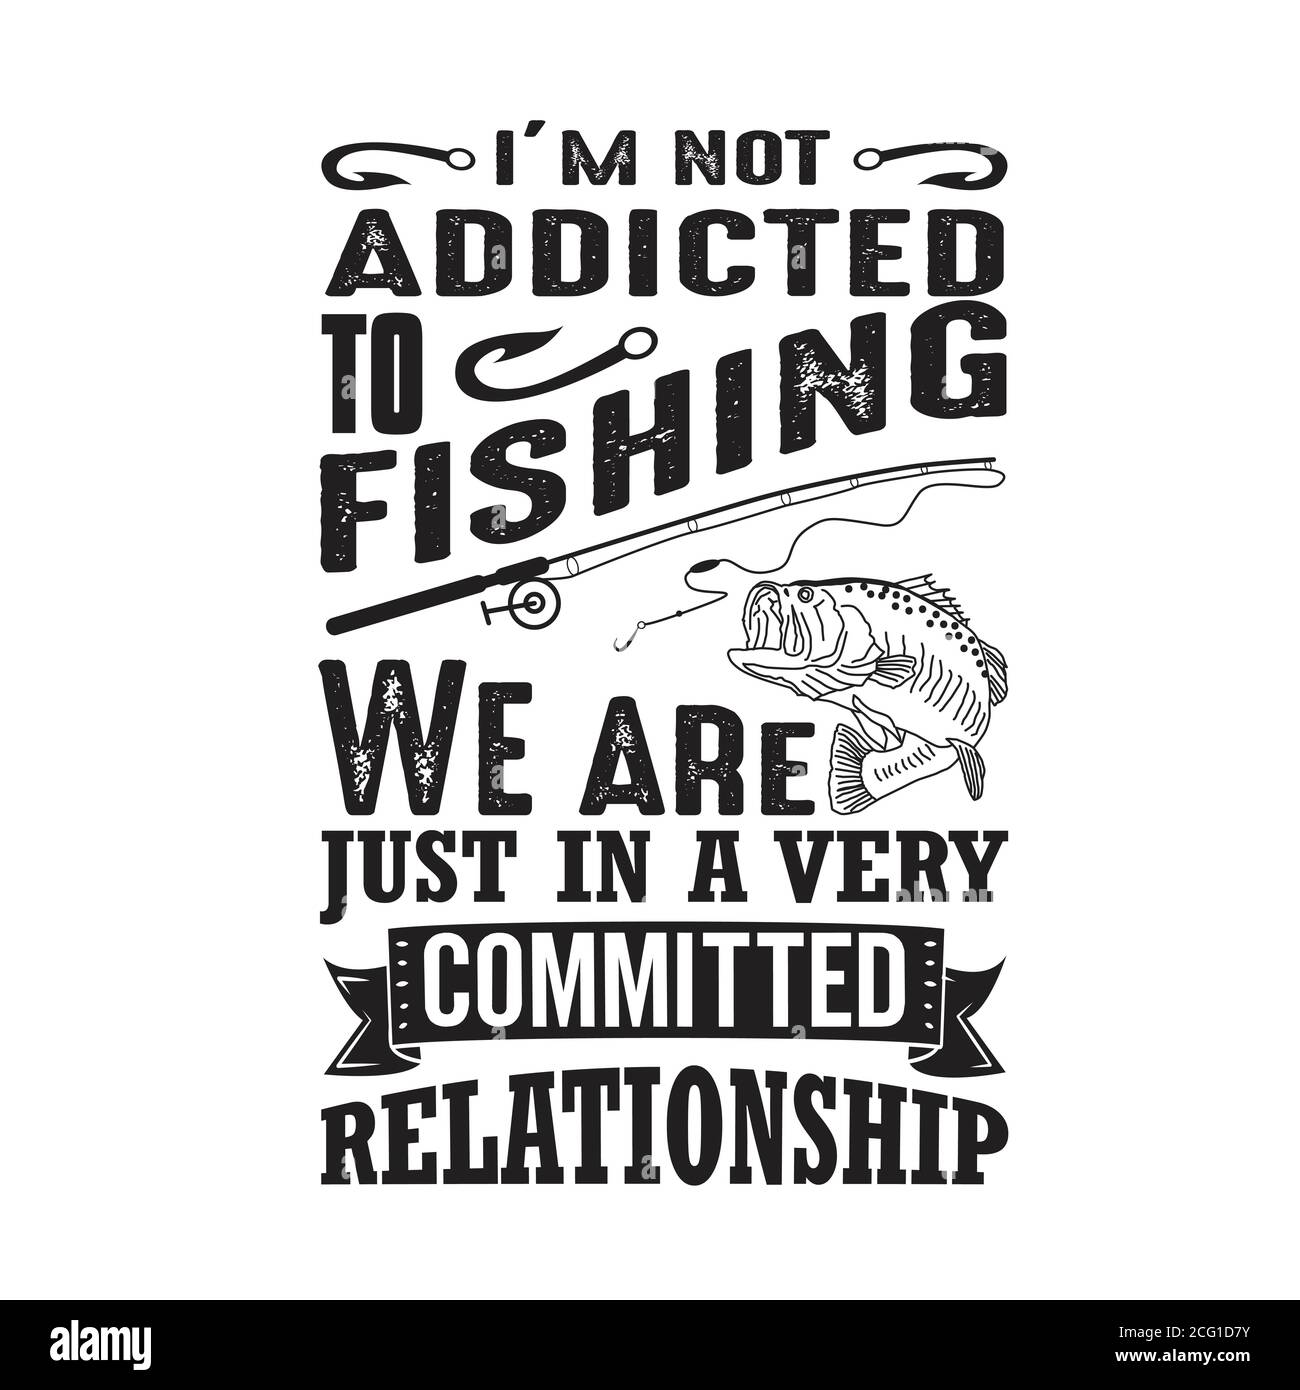 https://c8.alamy.com/comp/2CG1D7Y/fishing-quote-good-for-t-shirt-i-m-not-addicted-to-fishing-2CG1D7Y.jpg